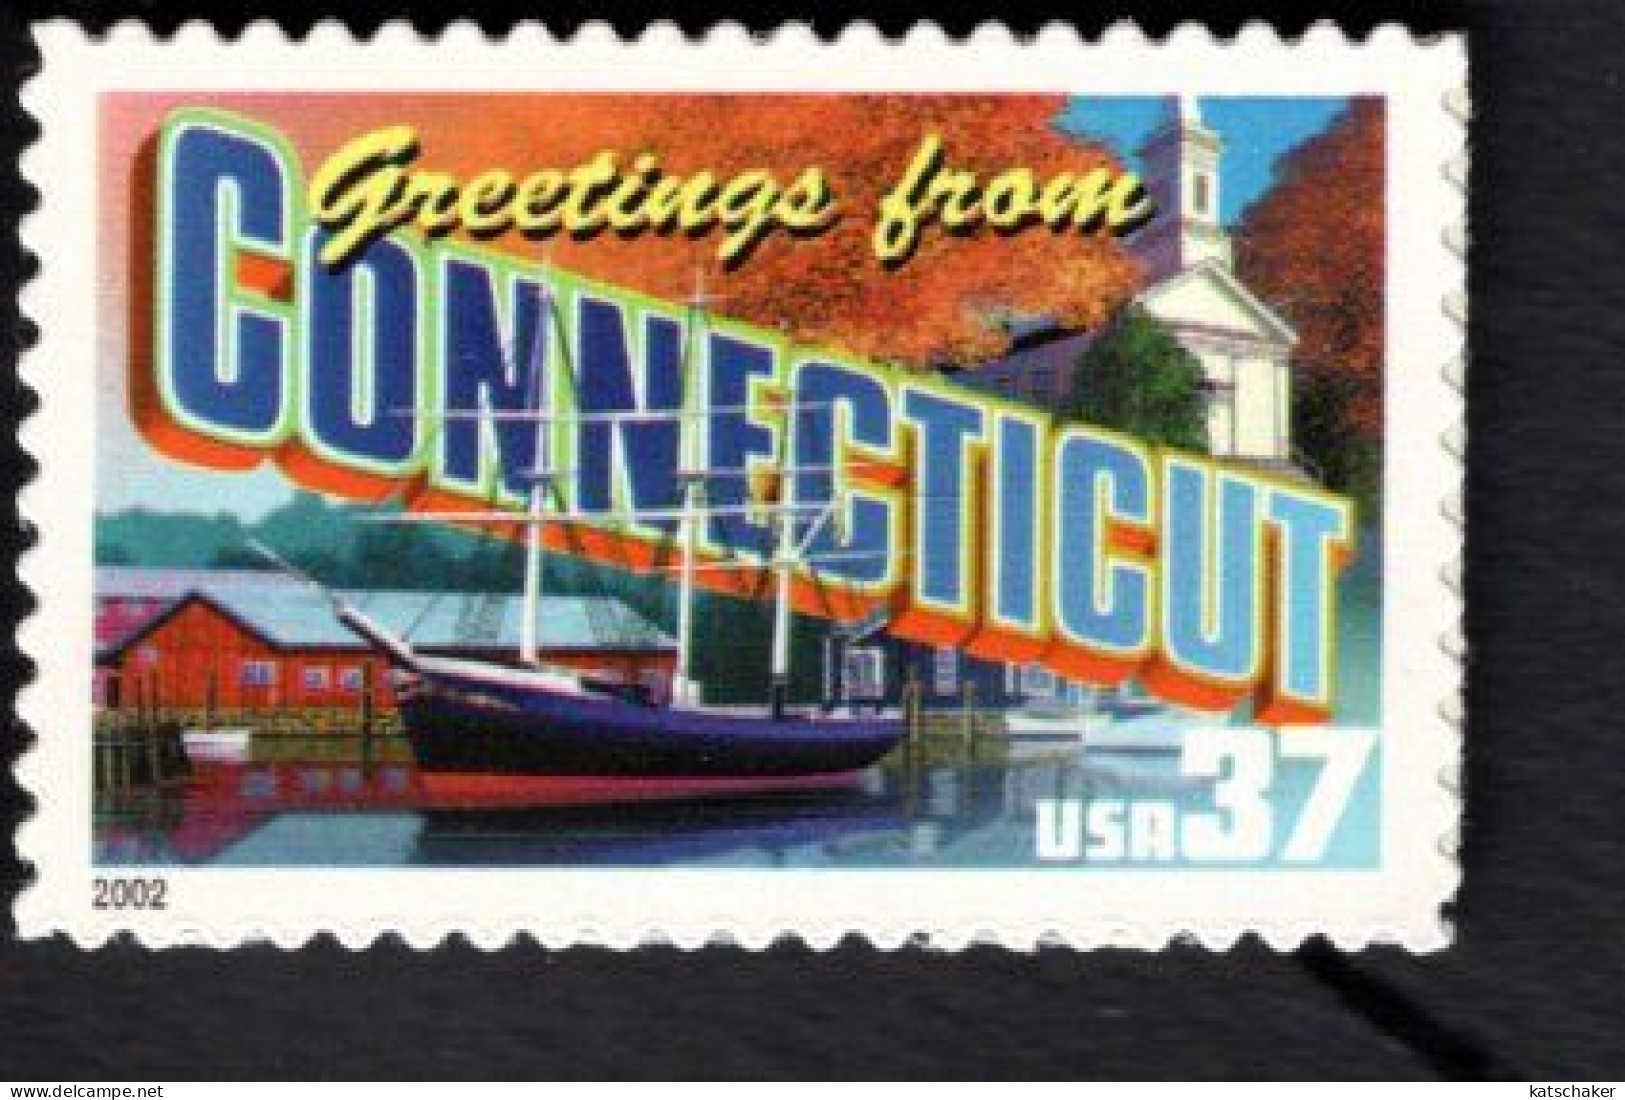 2017228952  2002  SCOTT 3702 (XX) POSTFRIS MINT NEVER HINGED - GREETINGS FROM AMERICA - CONNECTICUT - Neufs